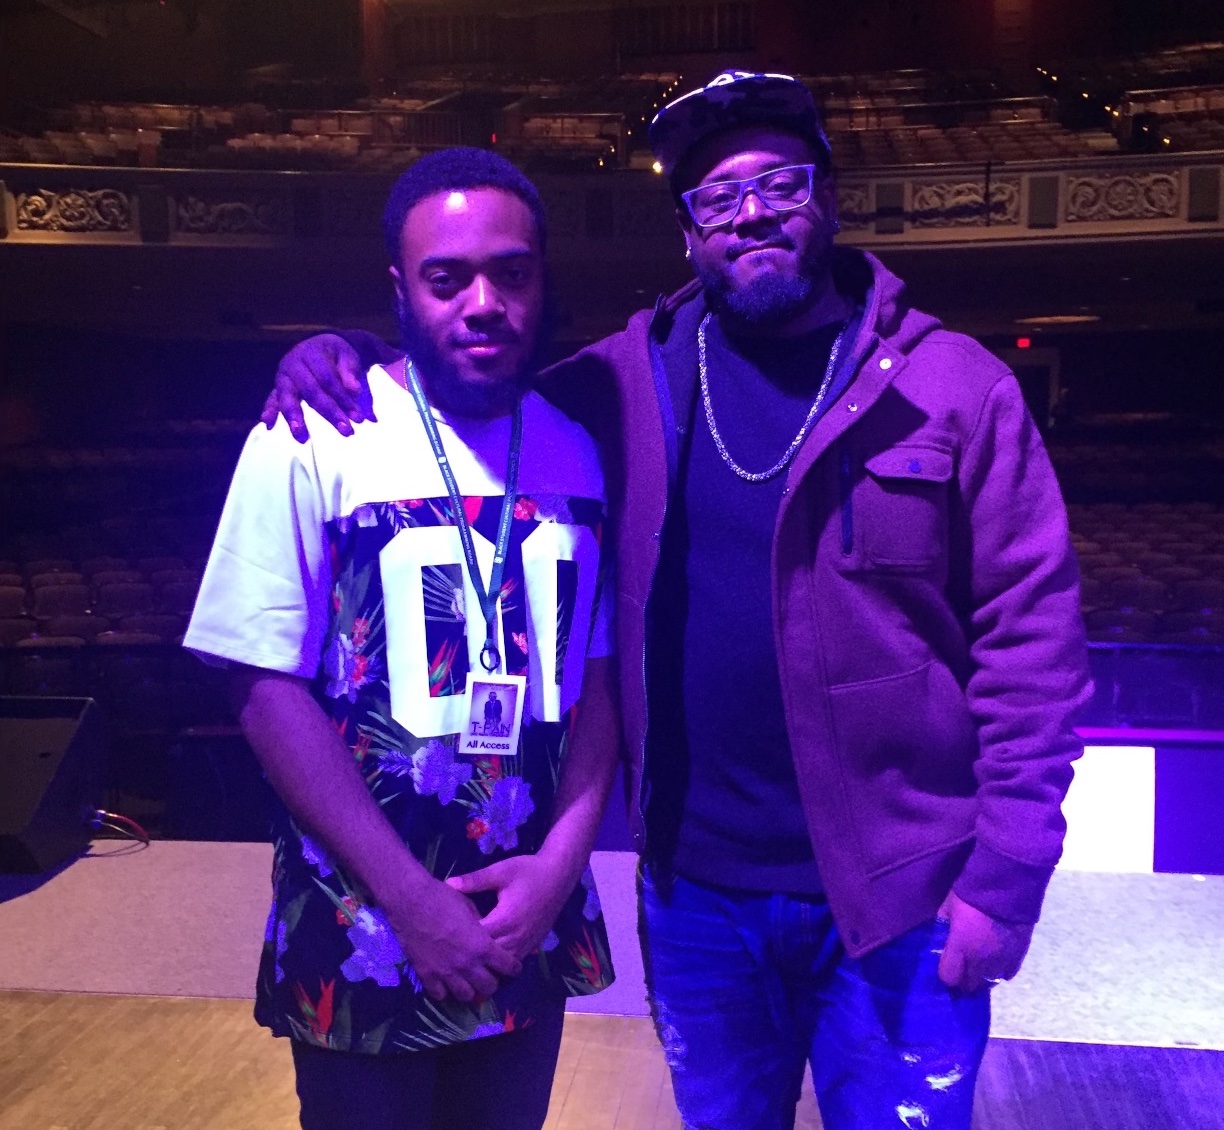 Jeffrey Billingslea and T-Pain pose for a picture together on Ohio University's campus